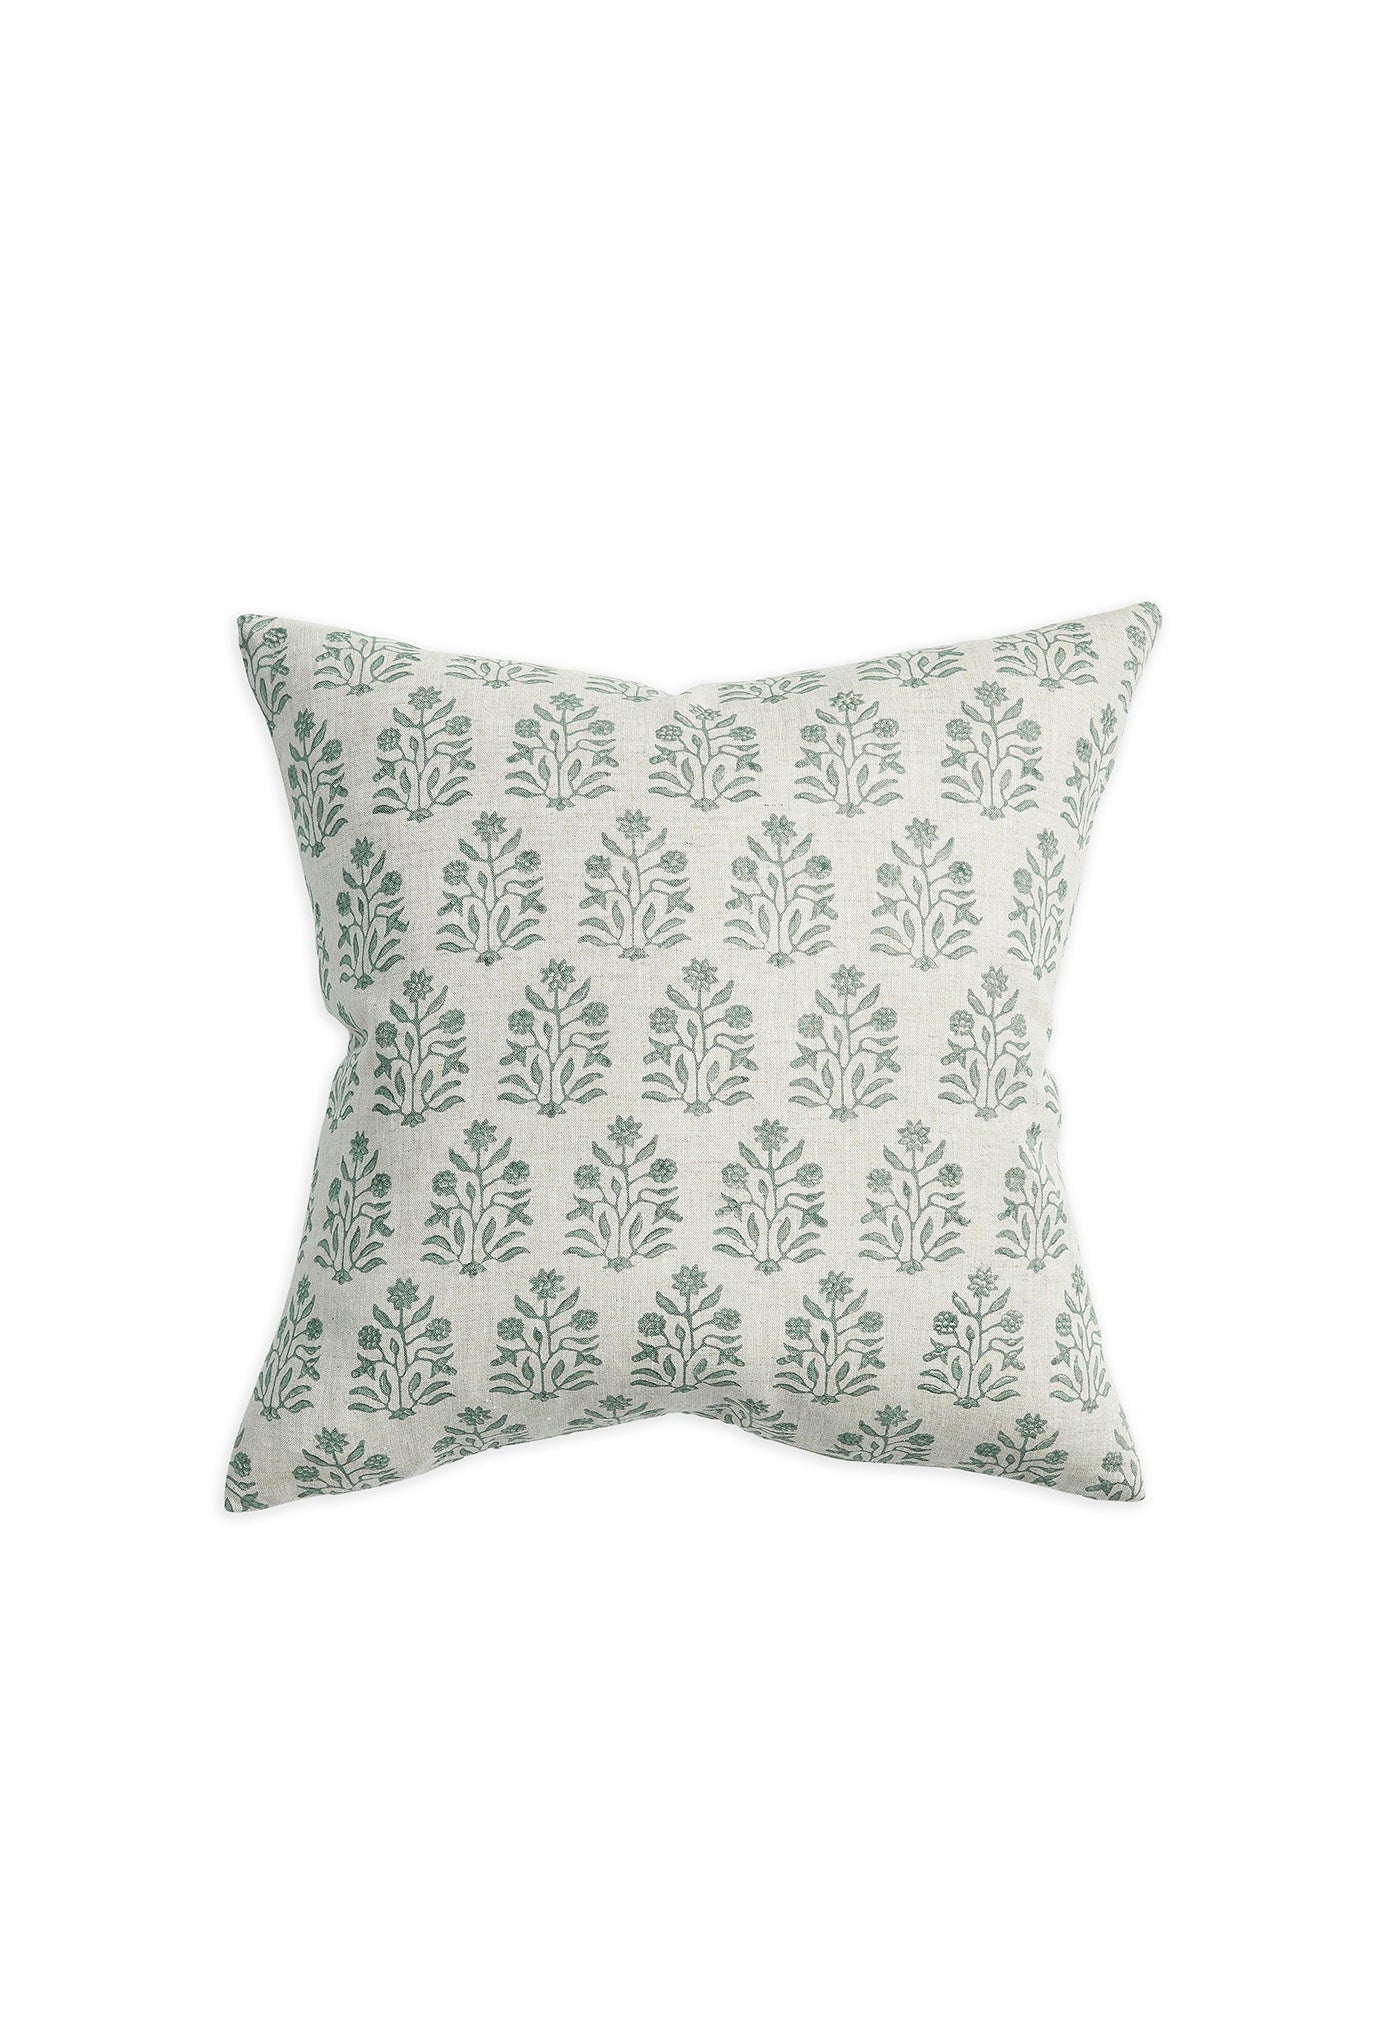 Amer Celadon Linen Cushion 50x50 sold by Angel Divine